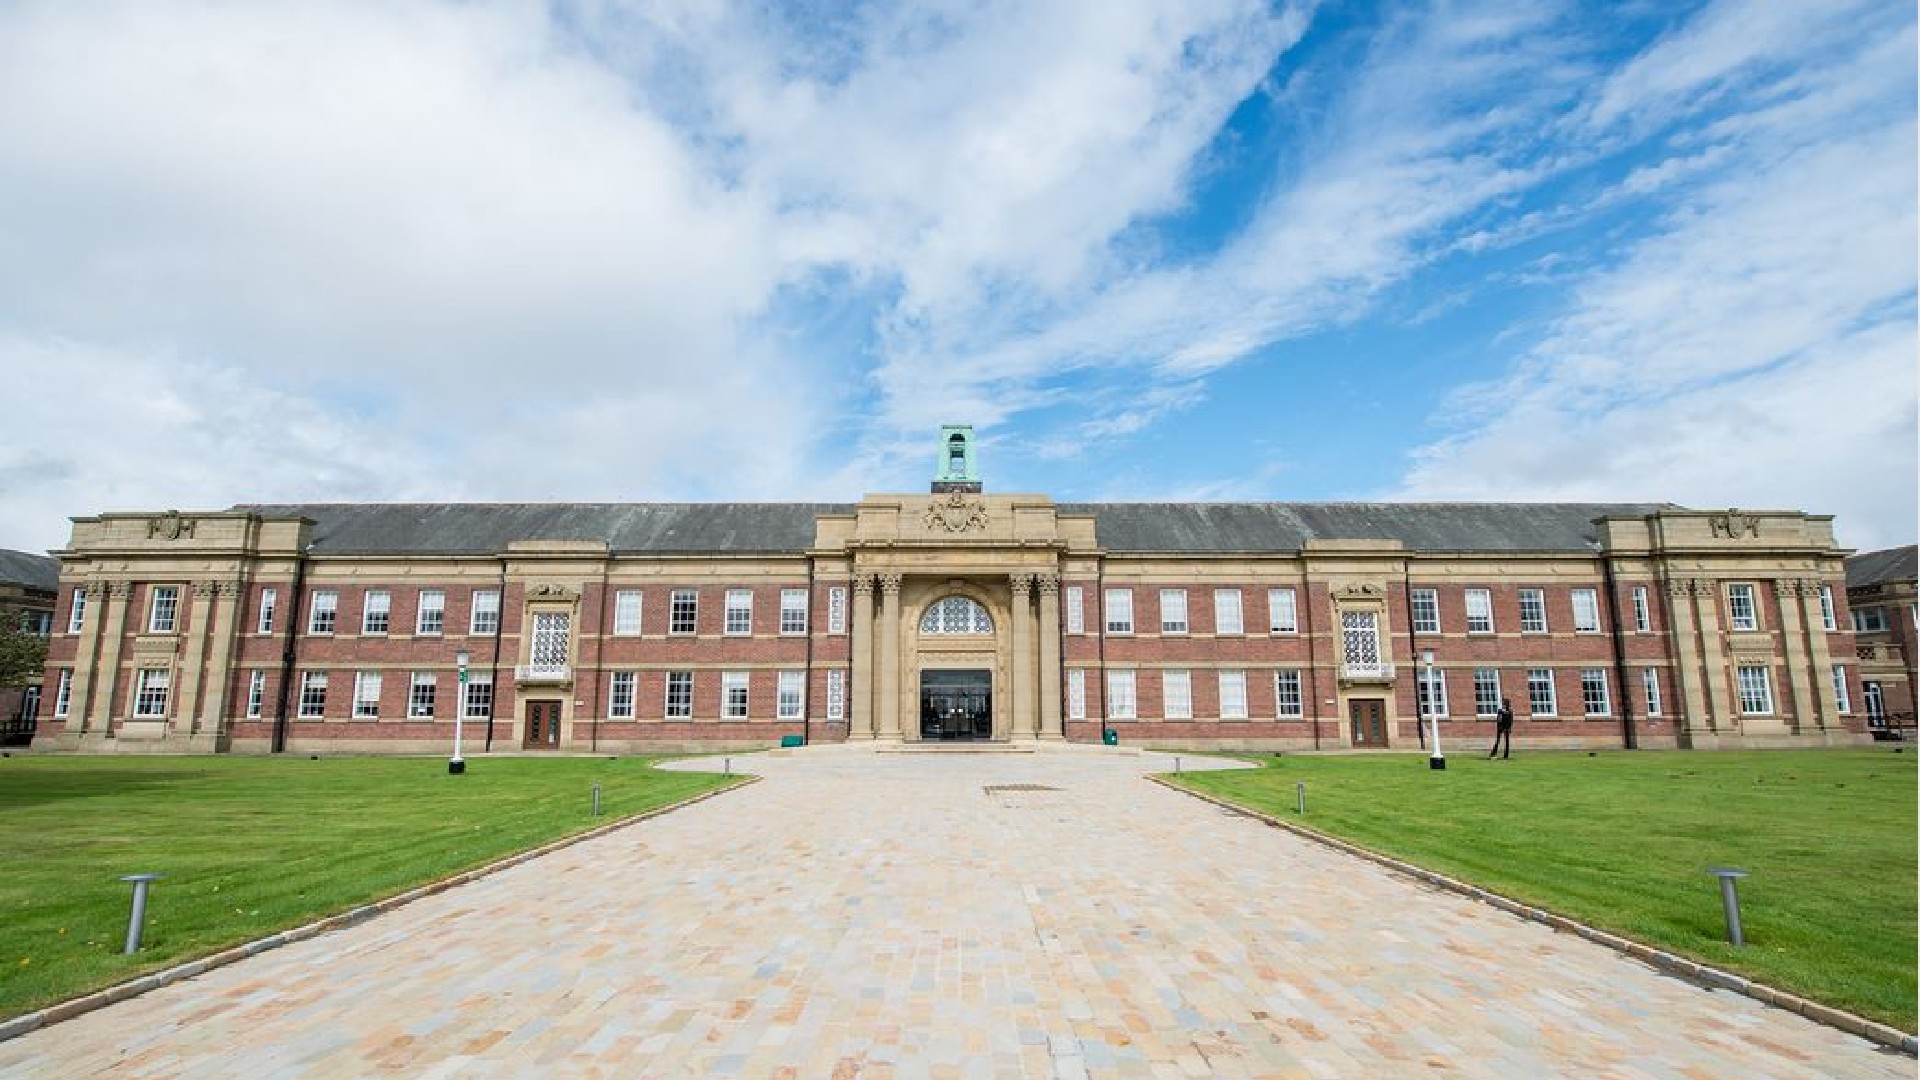 An image of the front of the Main Building at Edge Hill University. The image is set in the day.